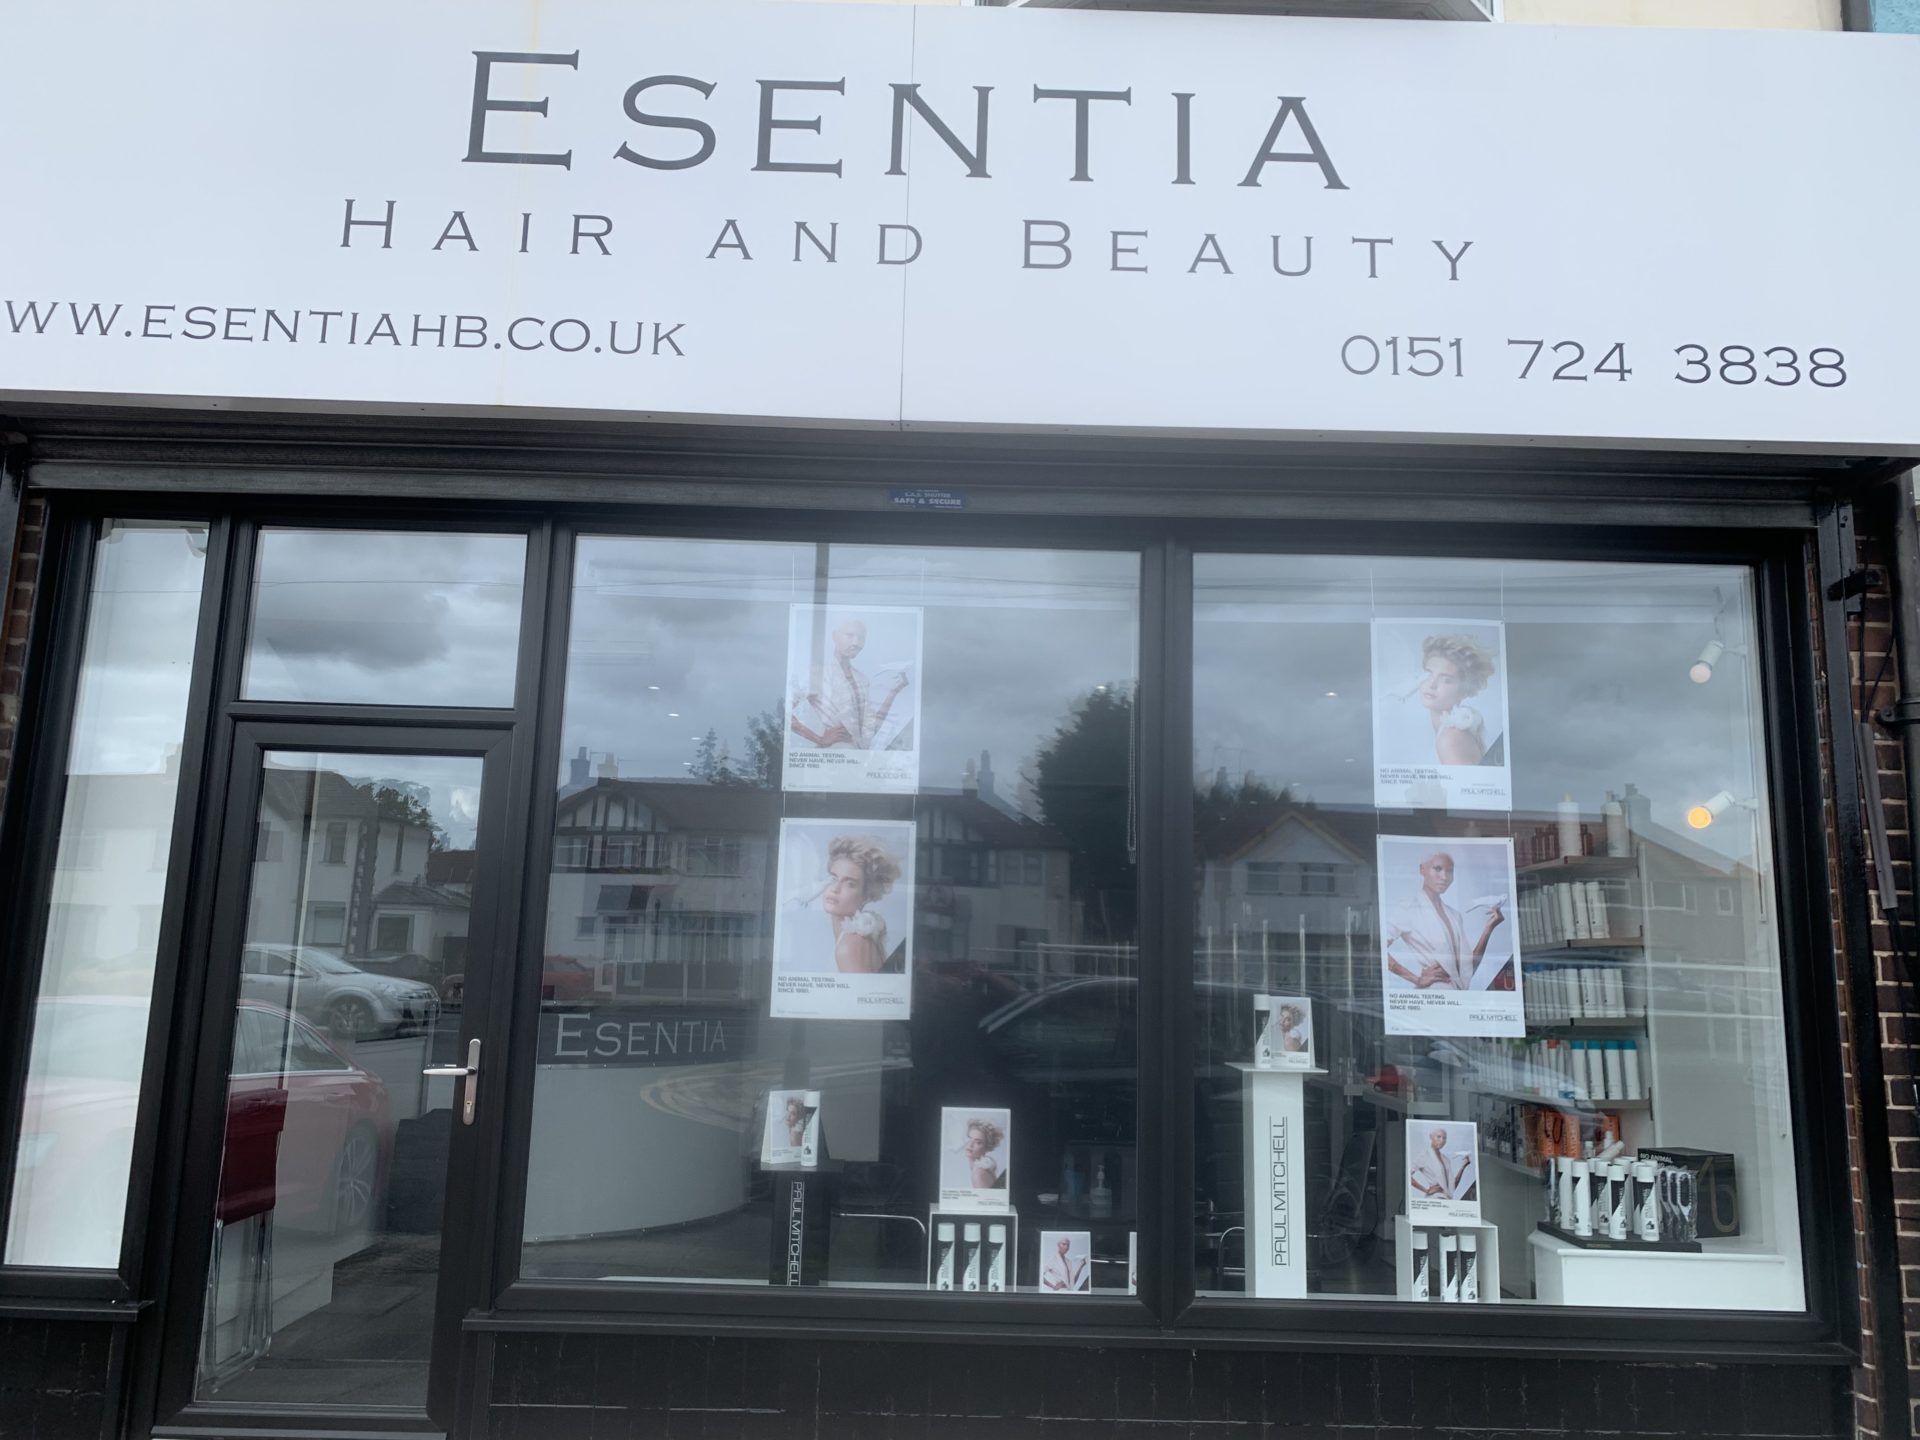 Xtop Hairdressers In Mossley Hill Liverpool Esentia Hair Beauty Salon .pagespeed.gp Jp Pj Ws Js Rj Rp Ri Rm Cp Md Im=75.ic.CjWew37HFy 